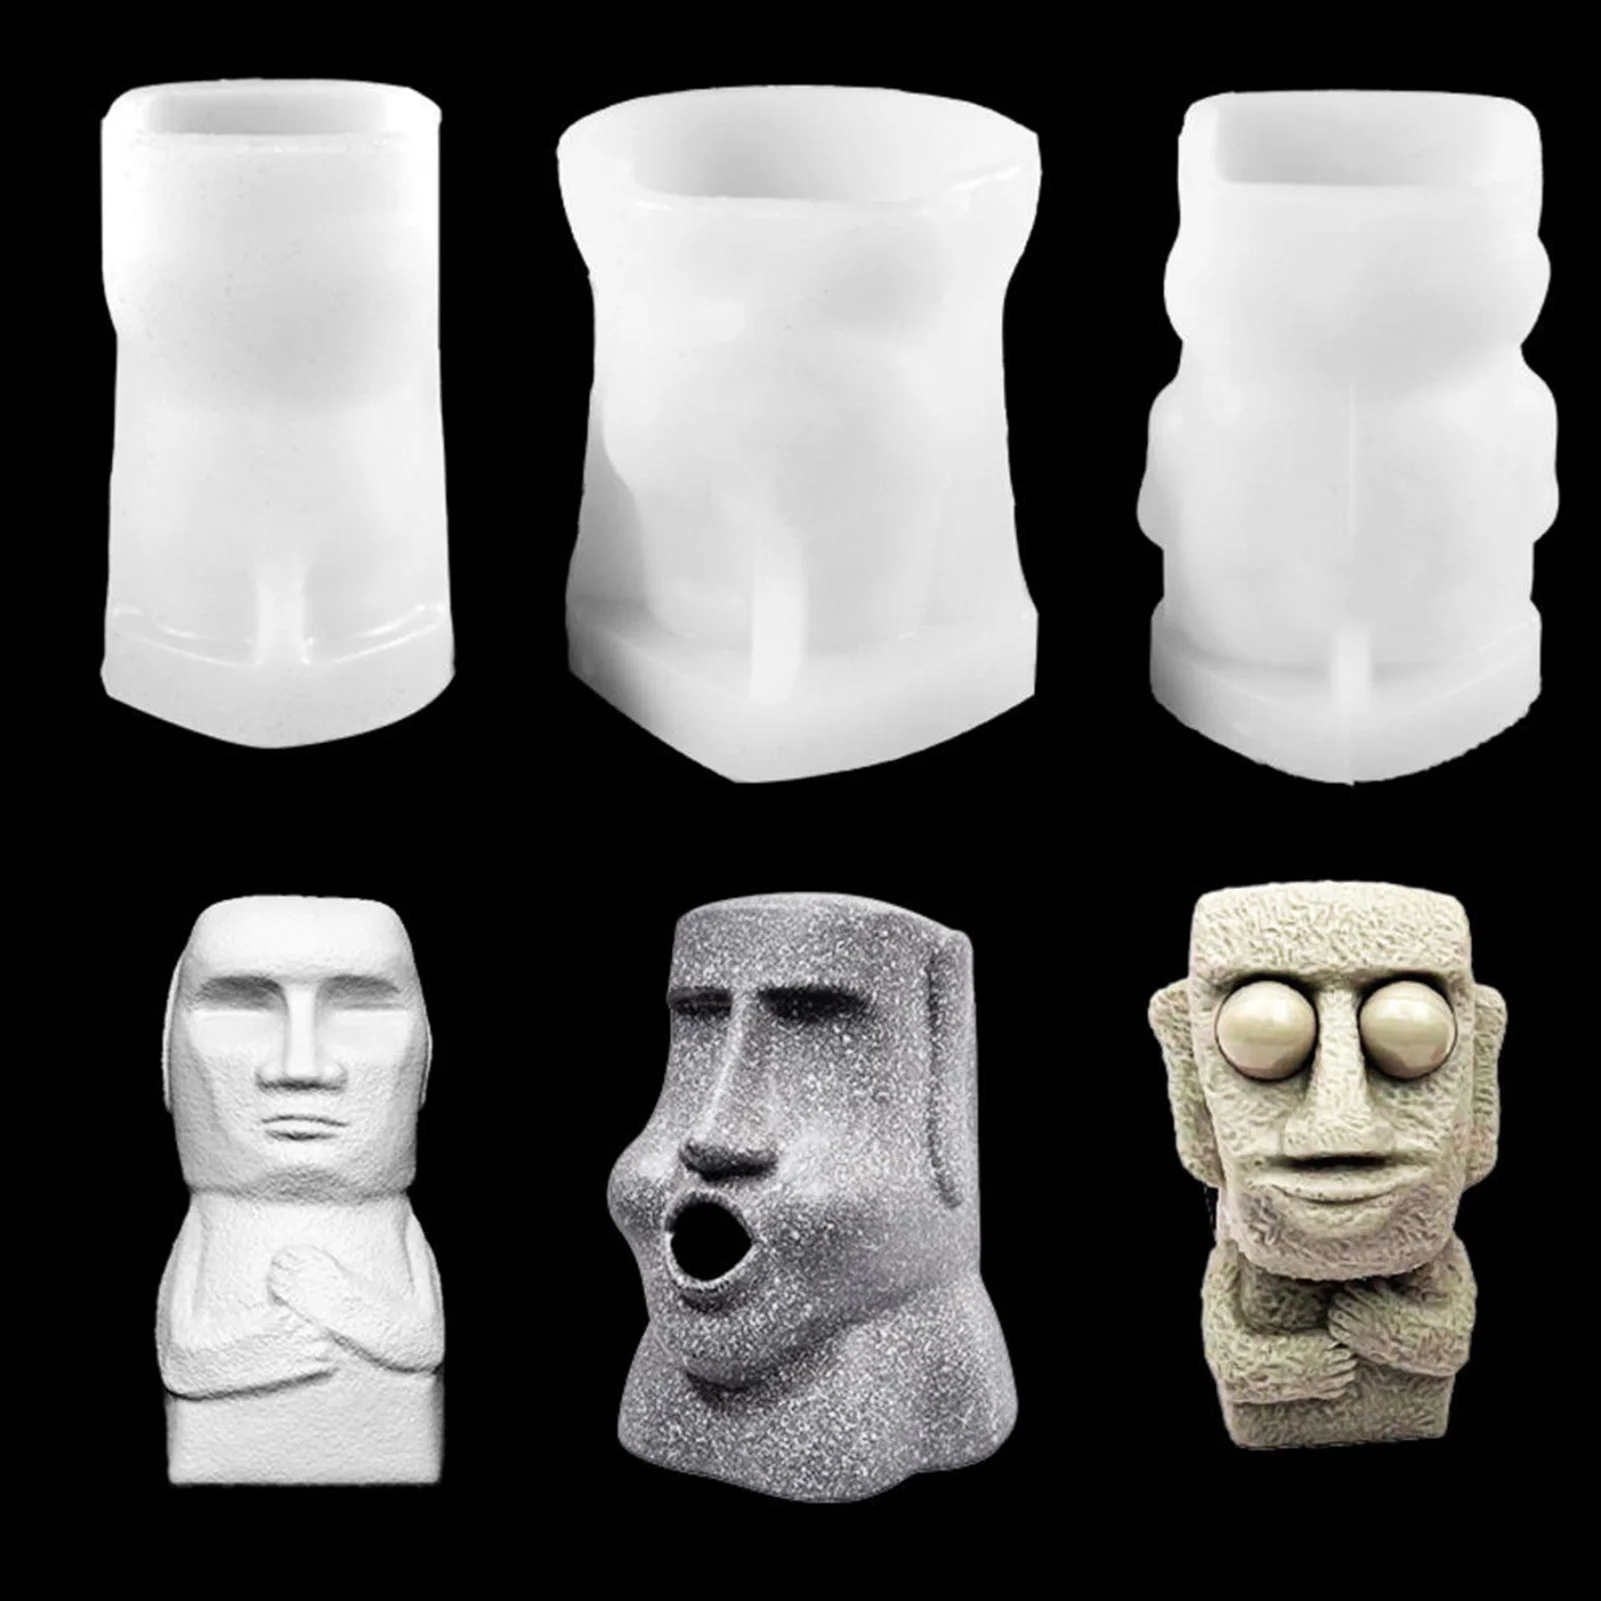 

Easter Island Moai Stone Statue Shaped Silicone Mold For DIY Soap Candle Making Stone Man Candle Mold Christmas Decorations